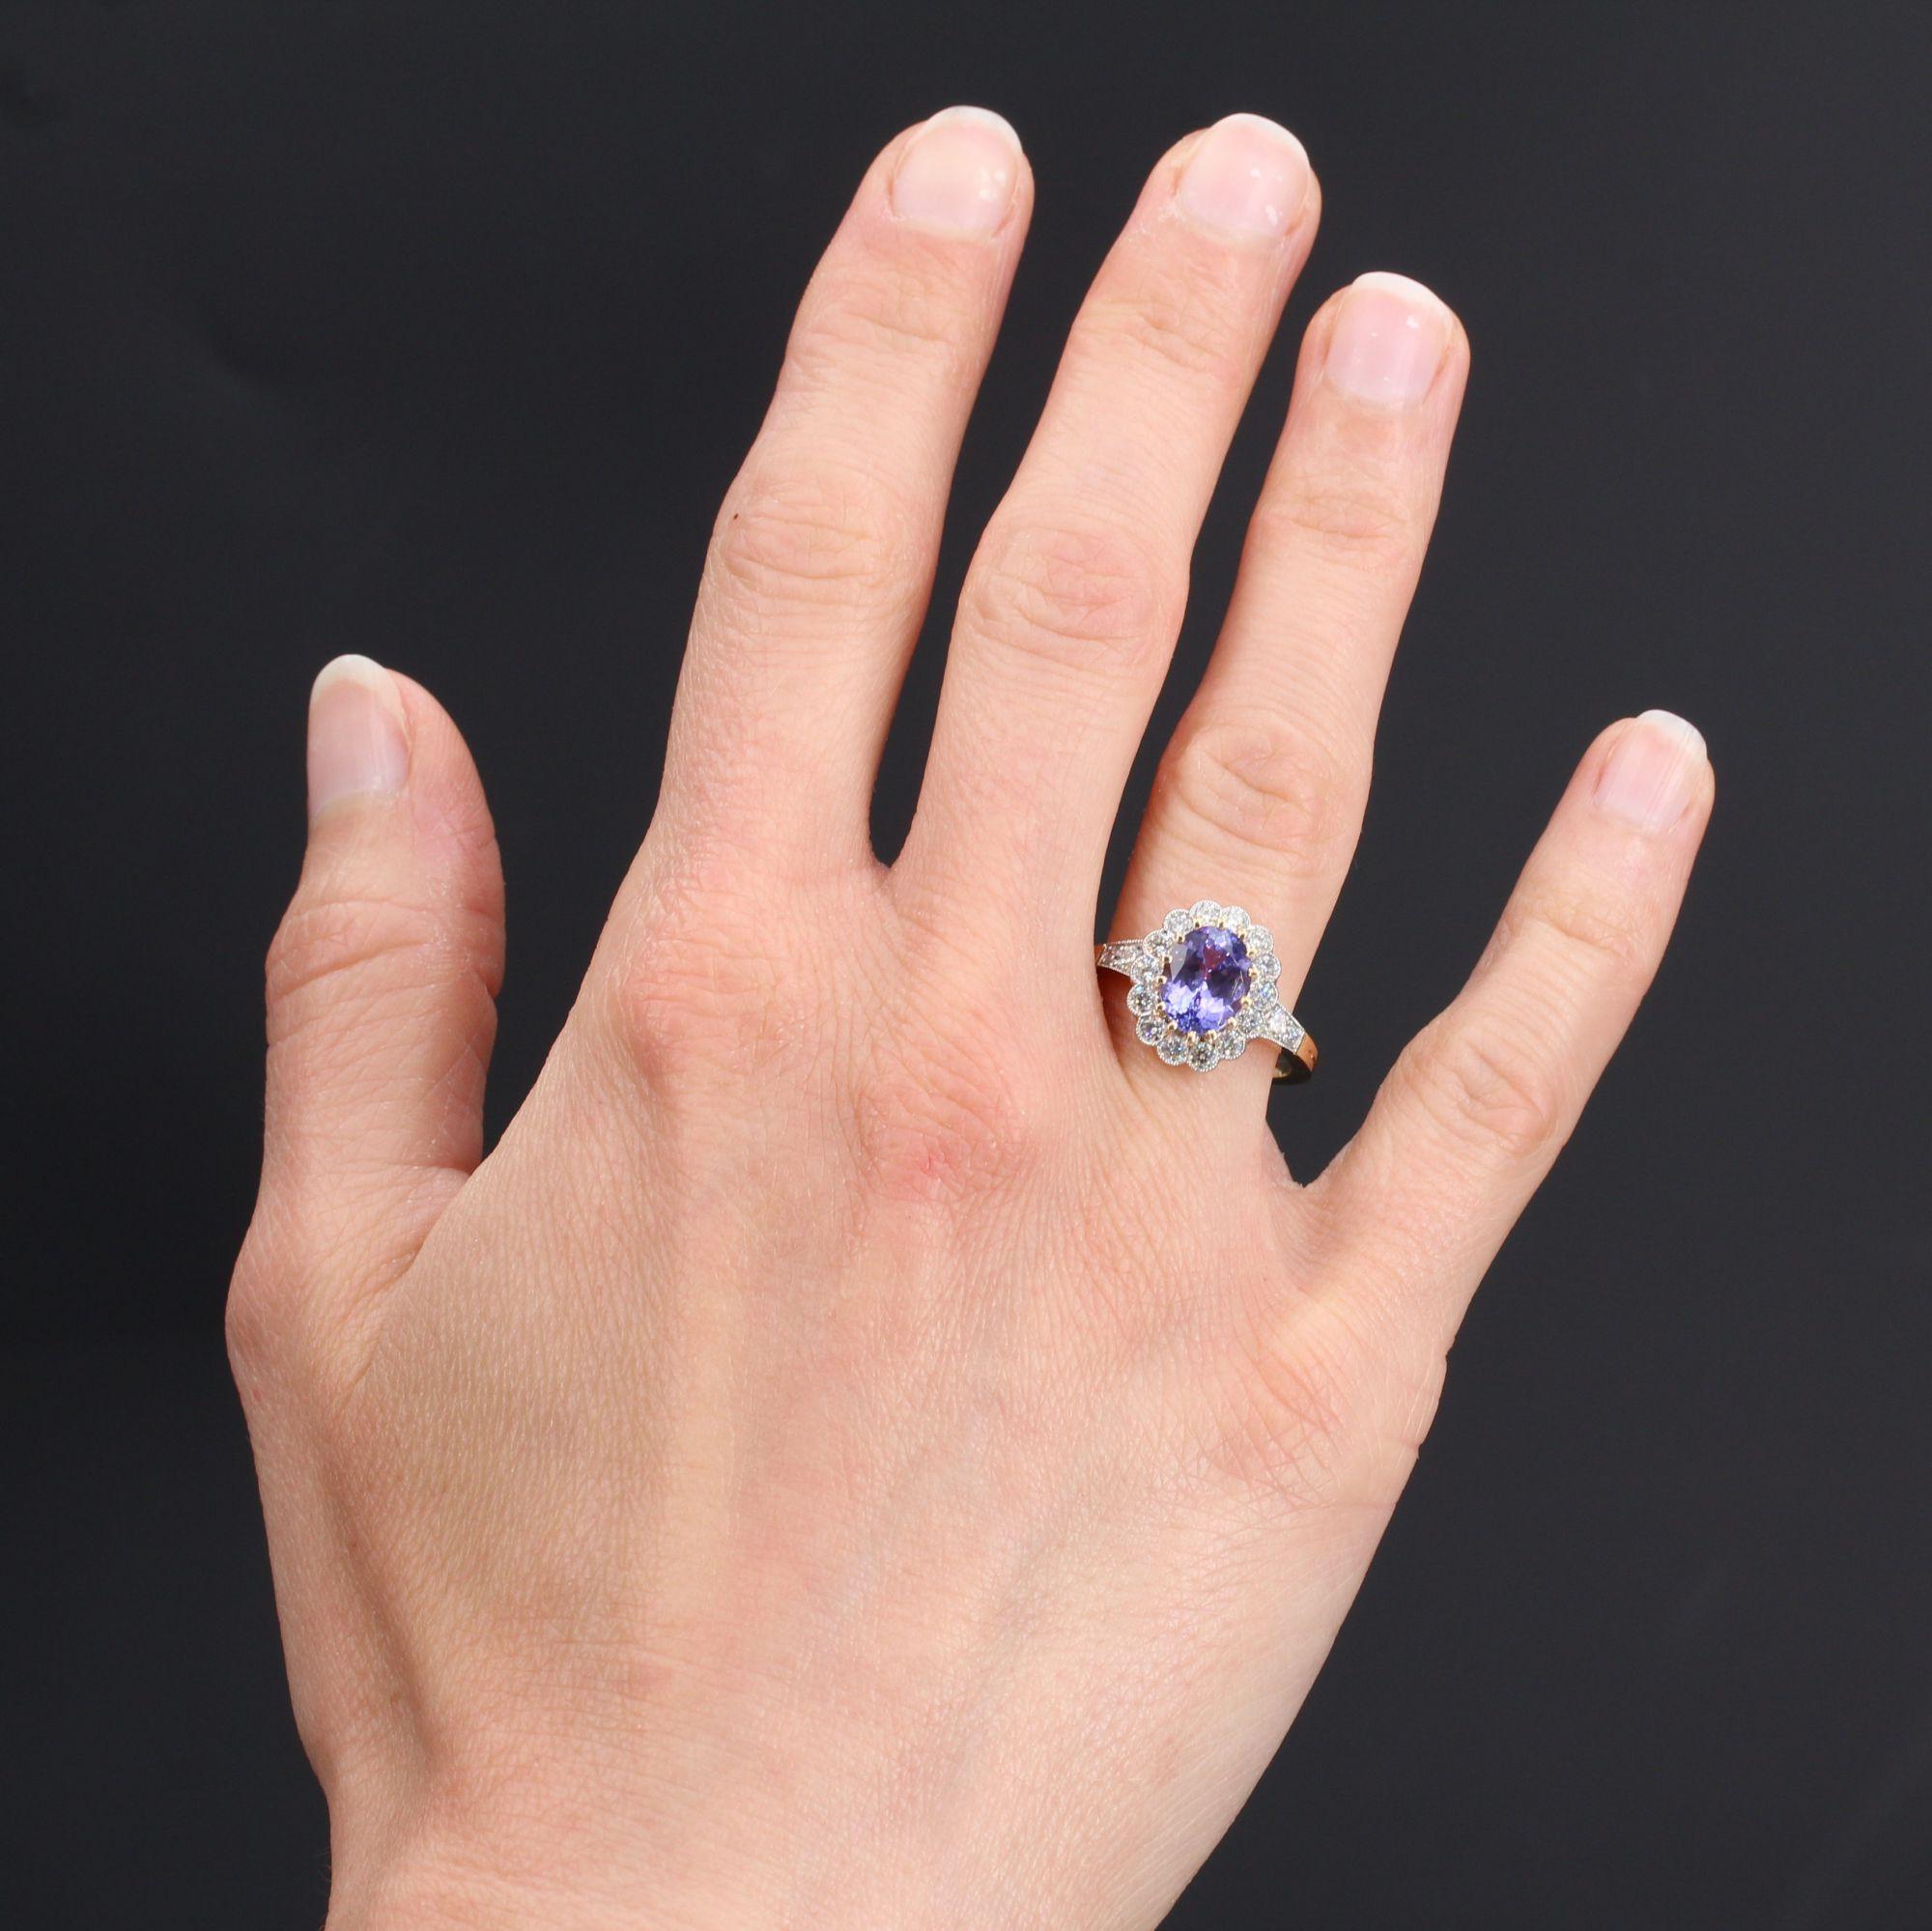 Ring in 18 karat yellow gold, eagle head hallmark and platinum, dog head hallmark.
Charming pompadour ring, it is set with claws of an oval tanzanite surrounded by modern brilliant-cut diamonds in millegrain setting. On both sides of the head, on